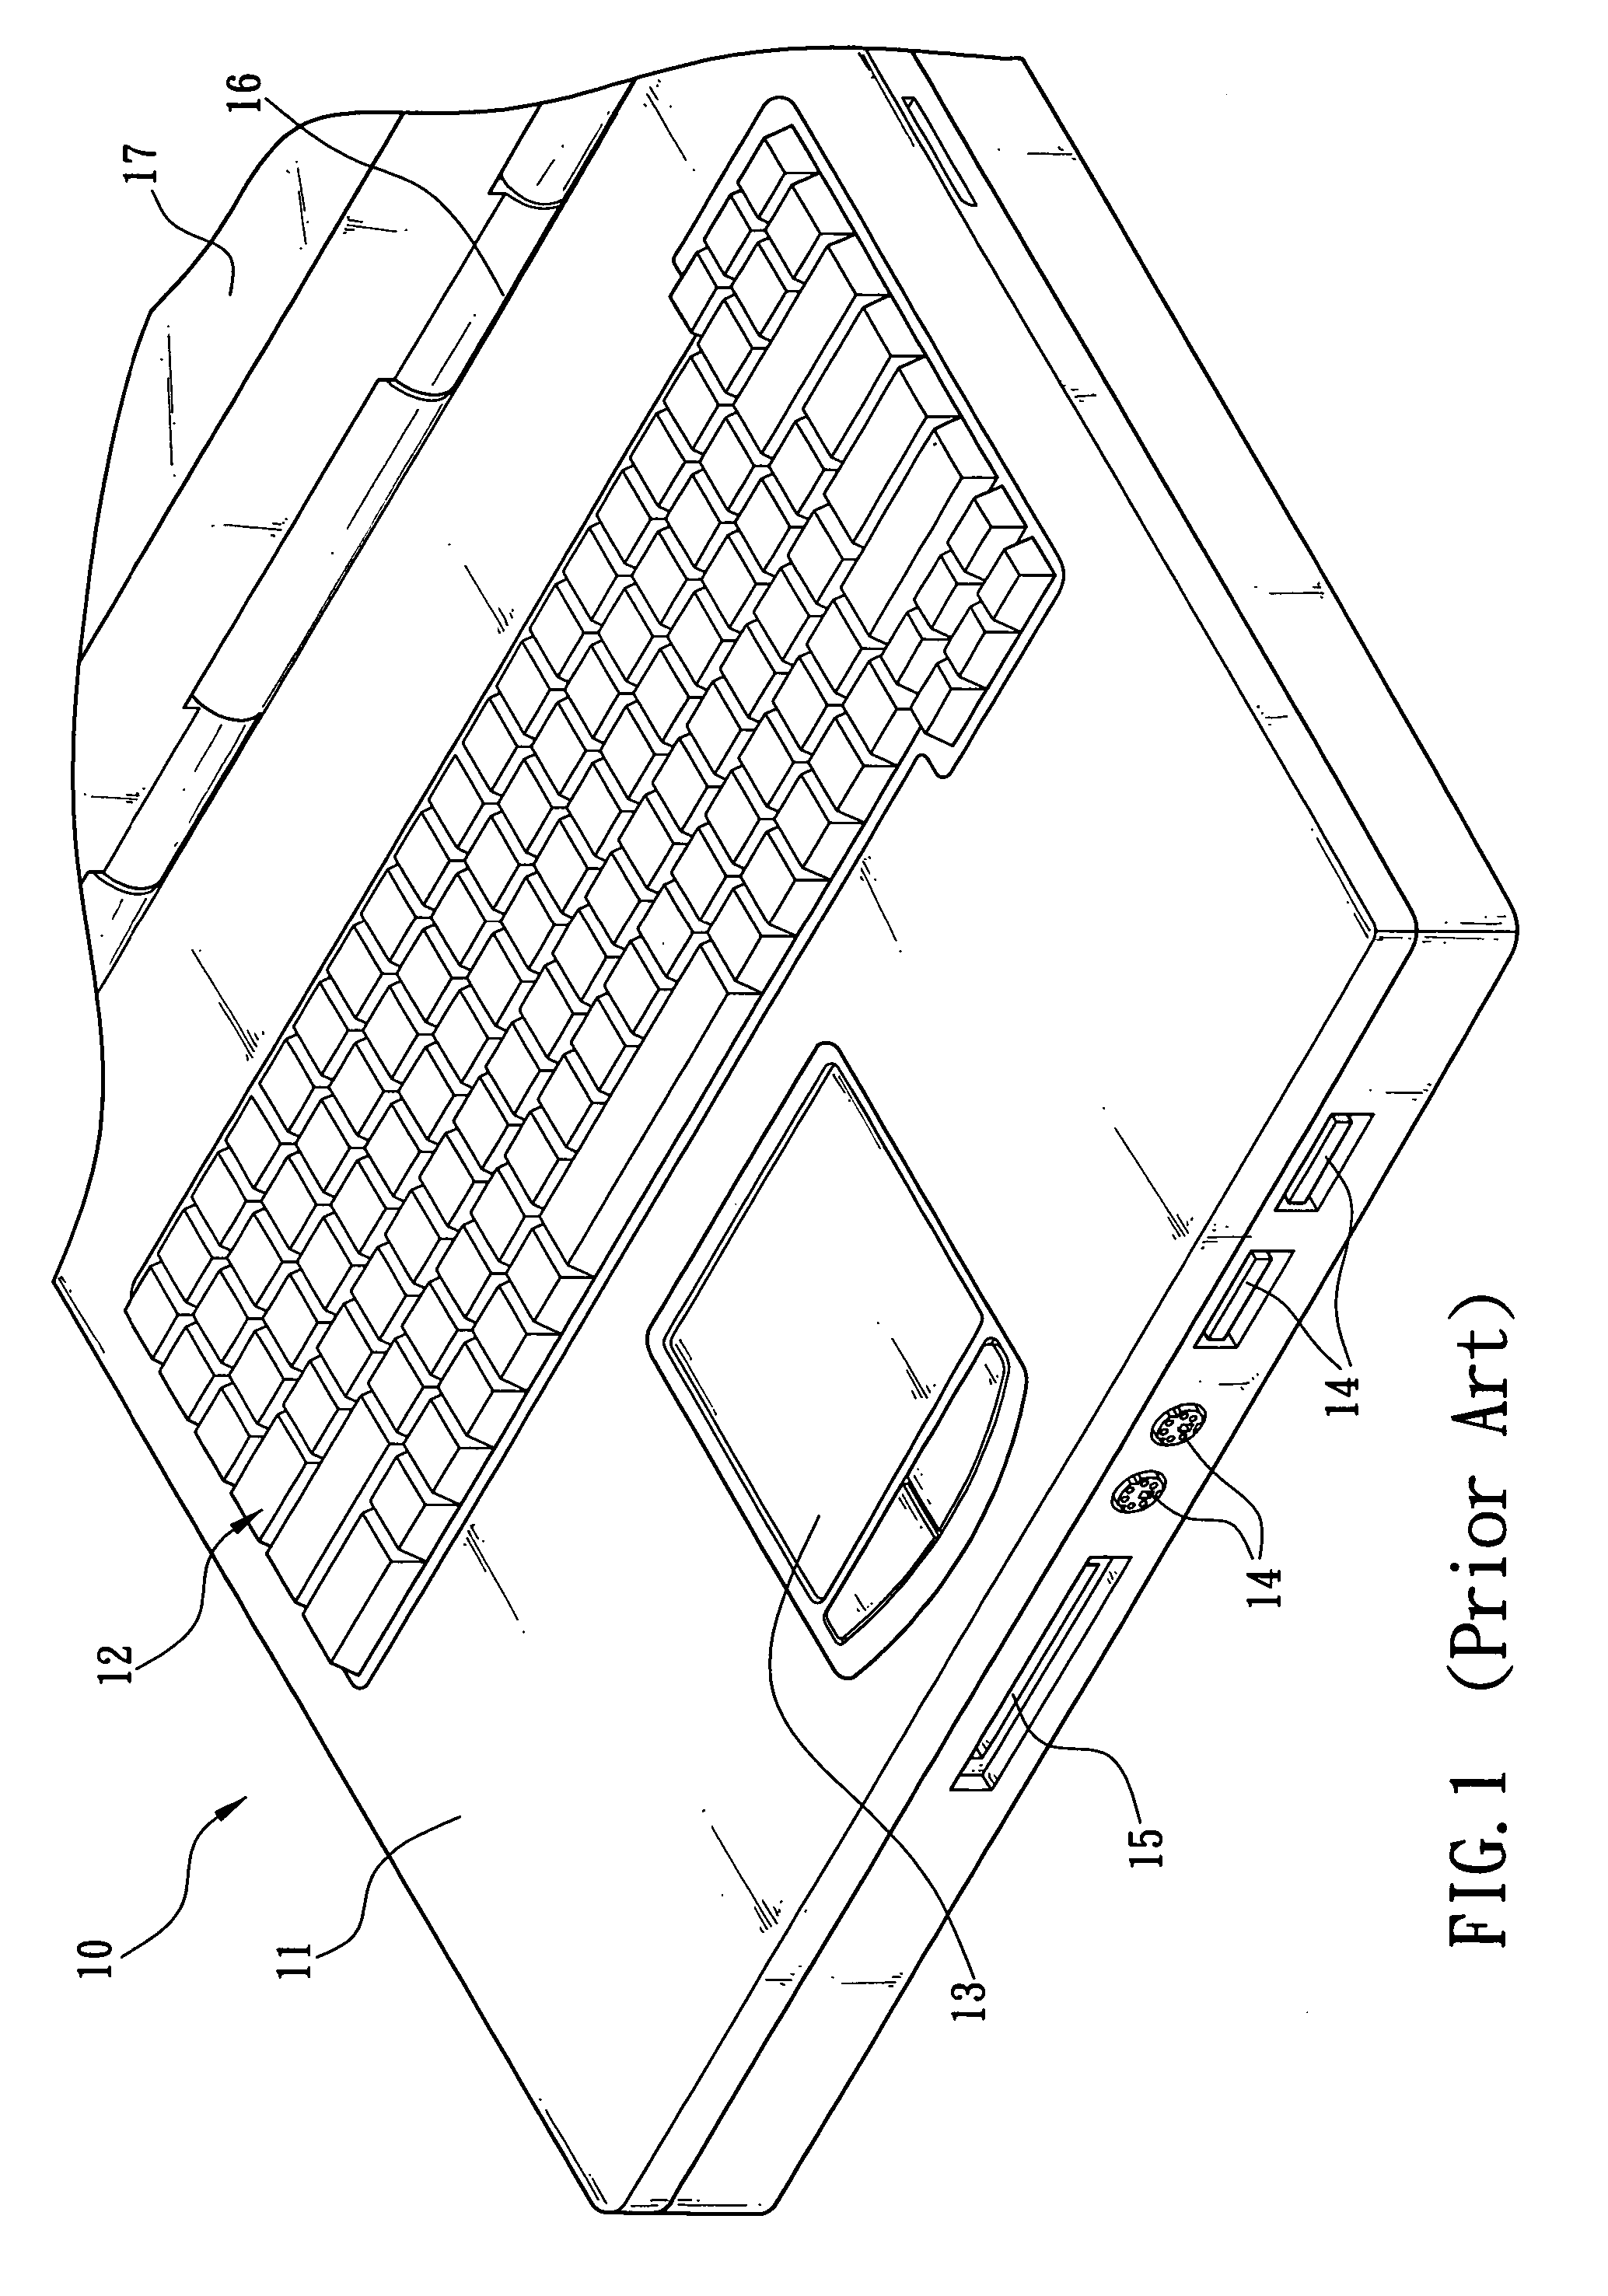 Sliding cover for slot of electronic device